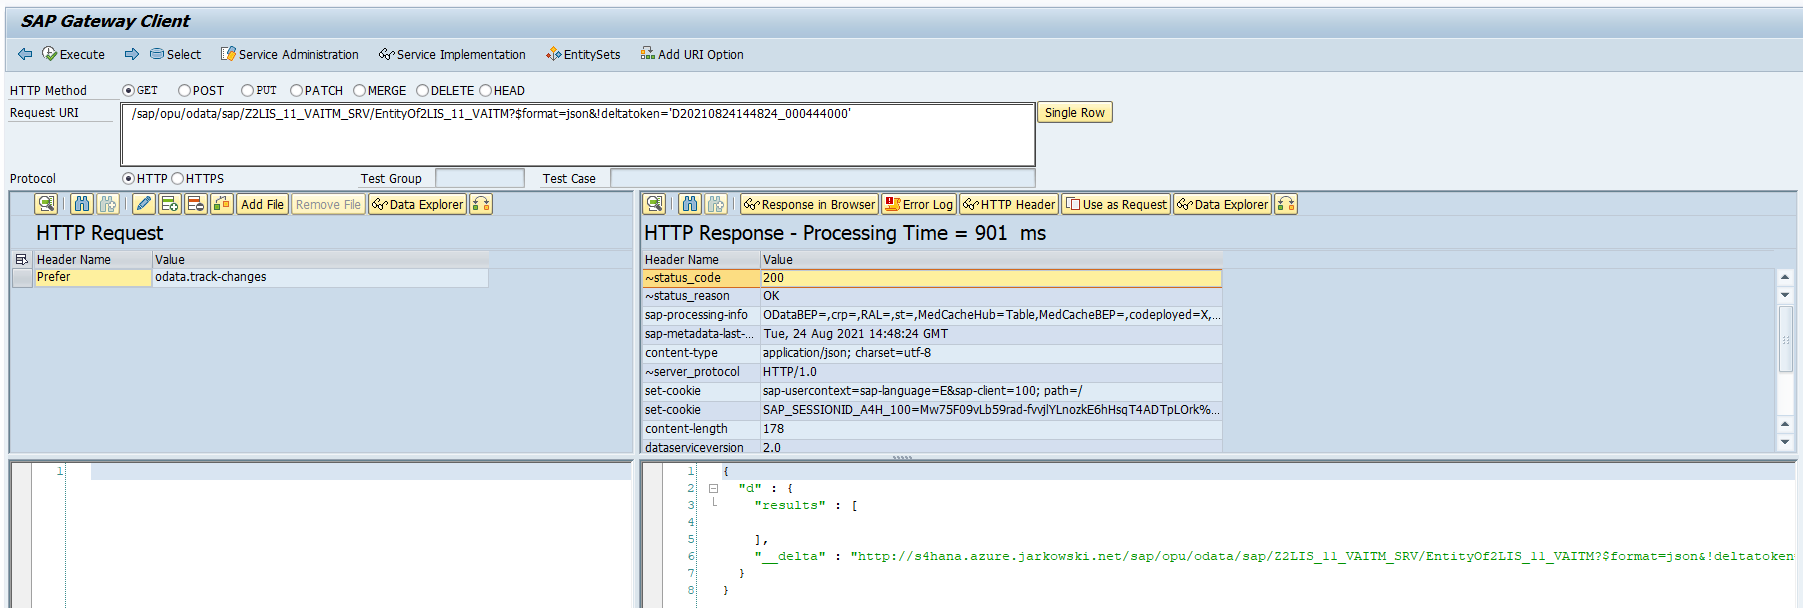 Extracting SAP data using OData - Part 7 - Delta extraction using SAP  Extractors and CDS Views - Microsoft Community Hub